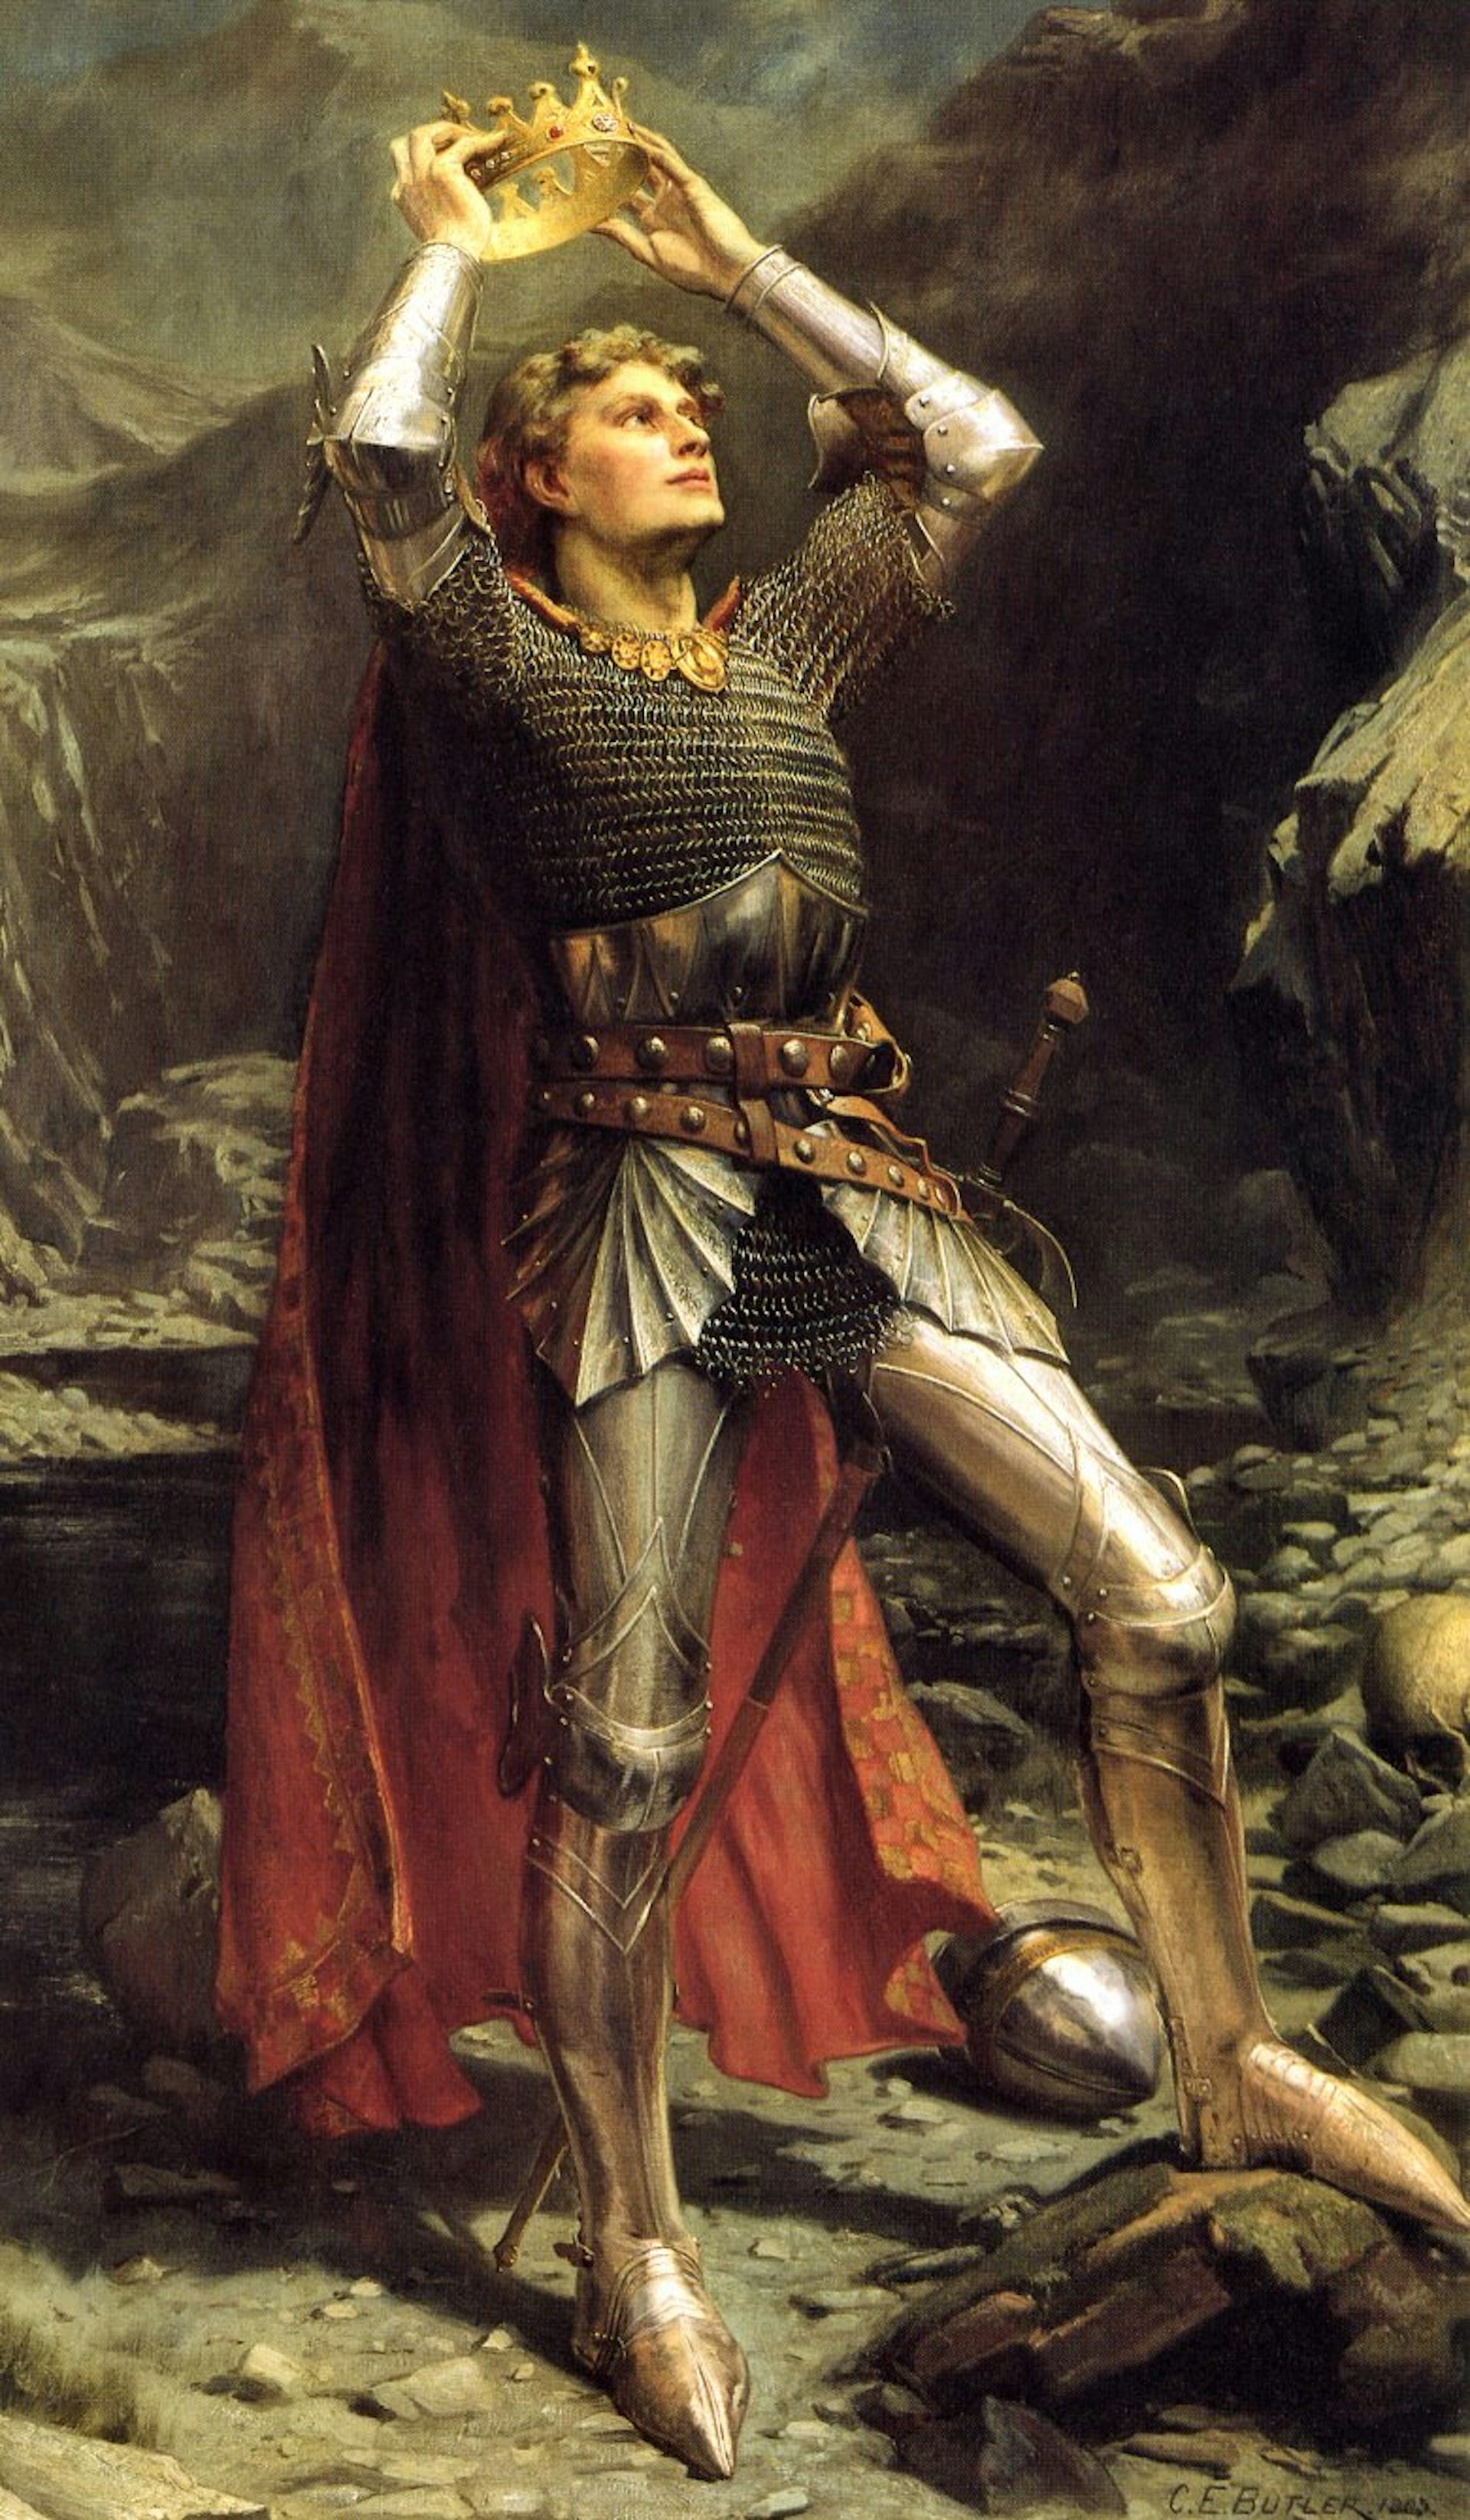 Guide to the classics: the Arthurian legend